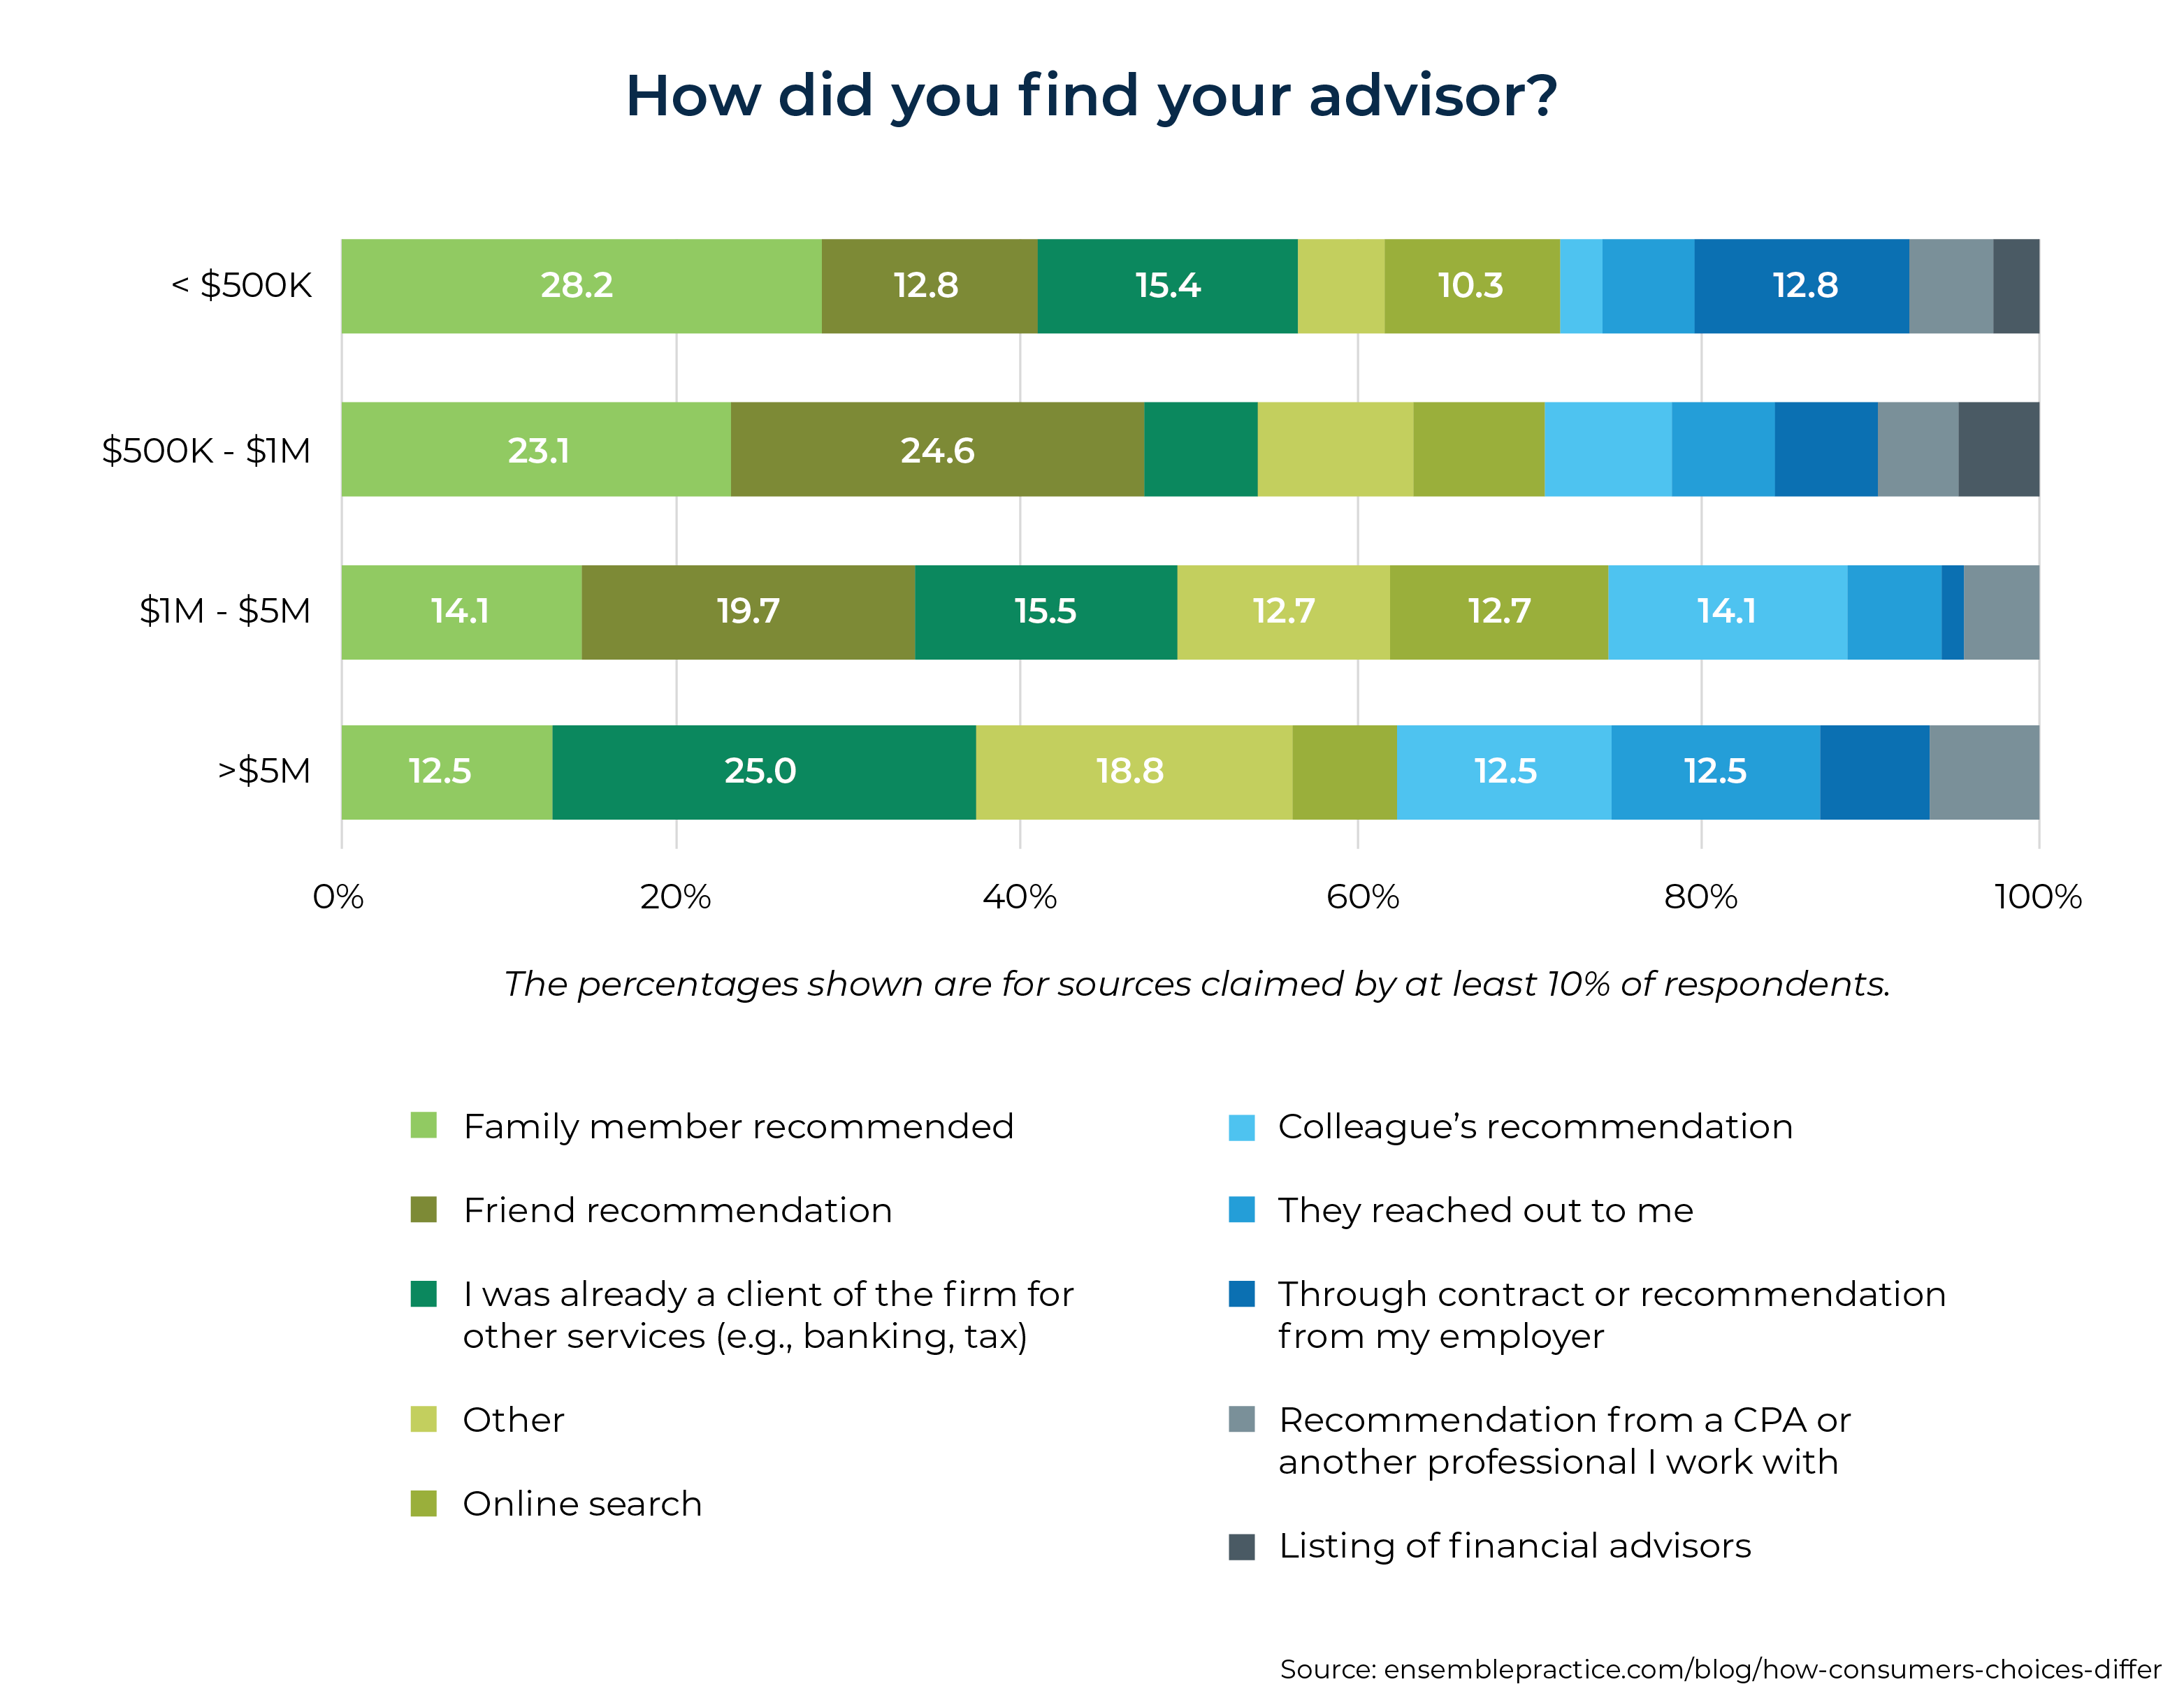 How Did You Find Your Advisor